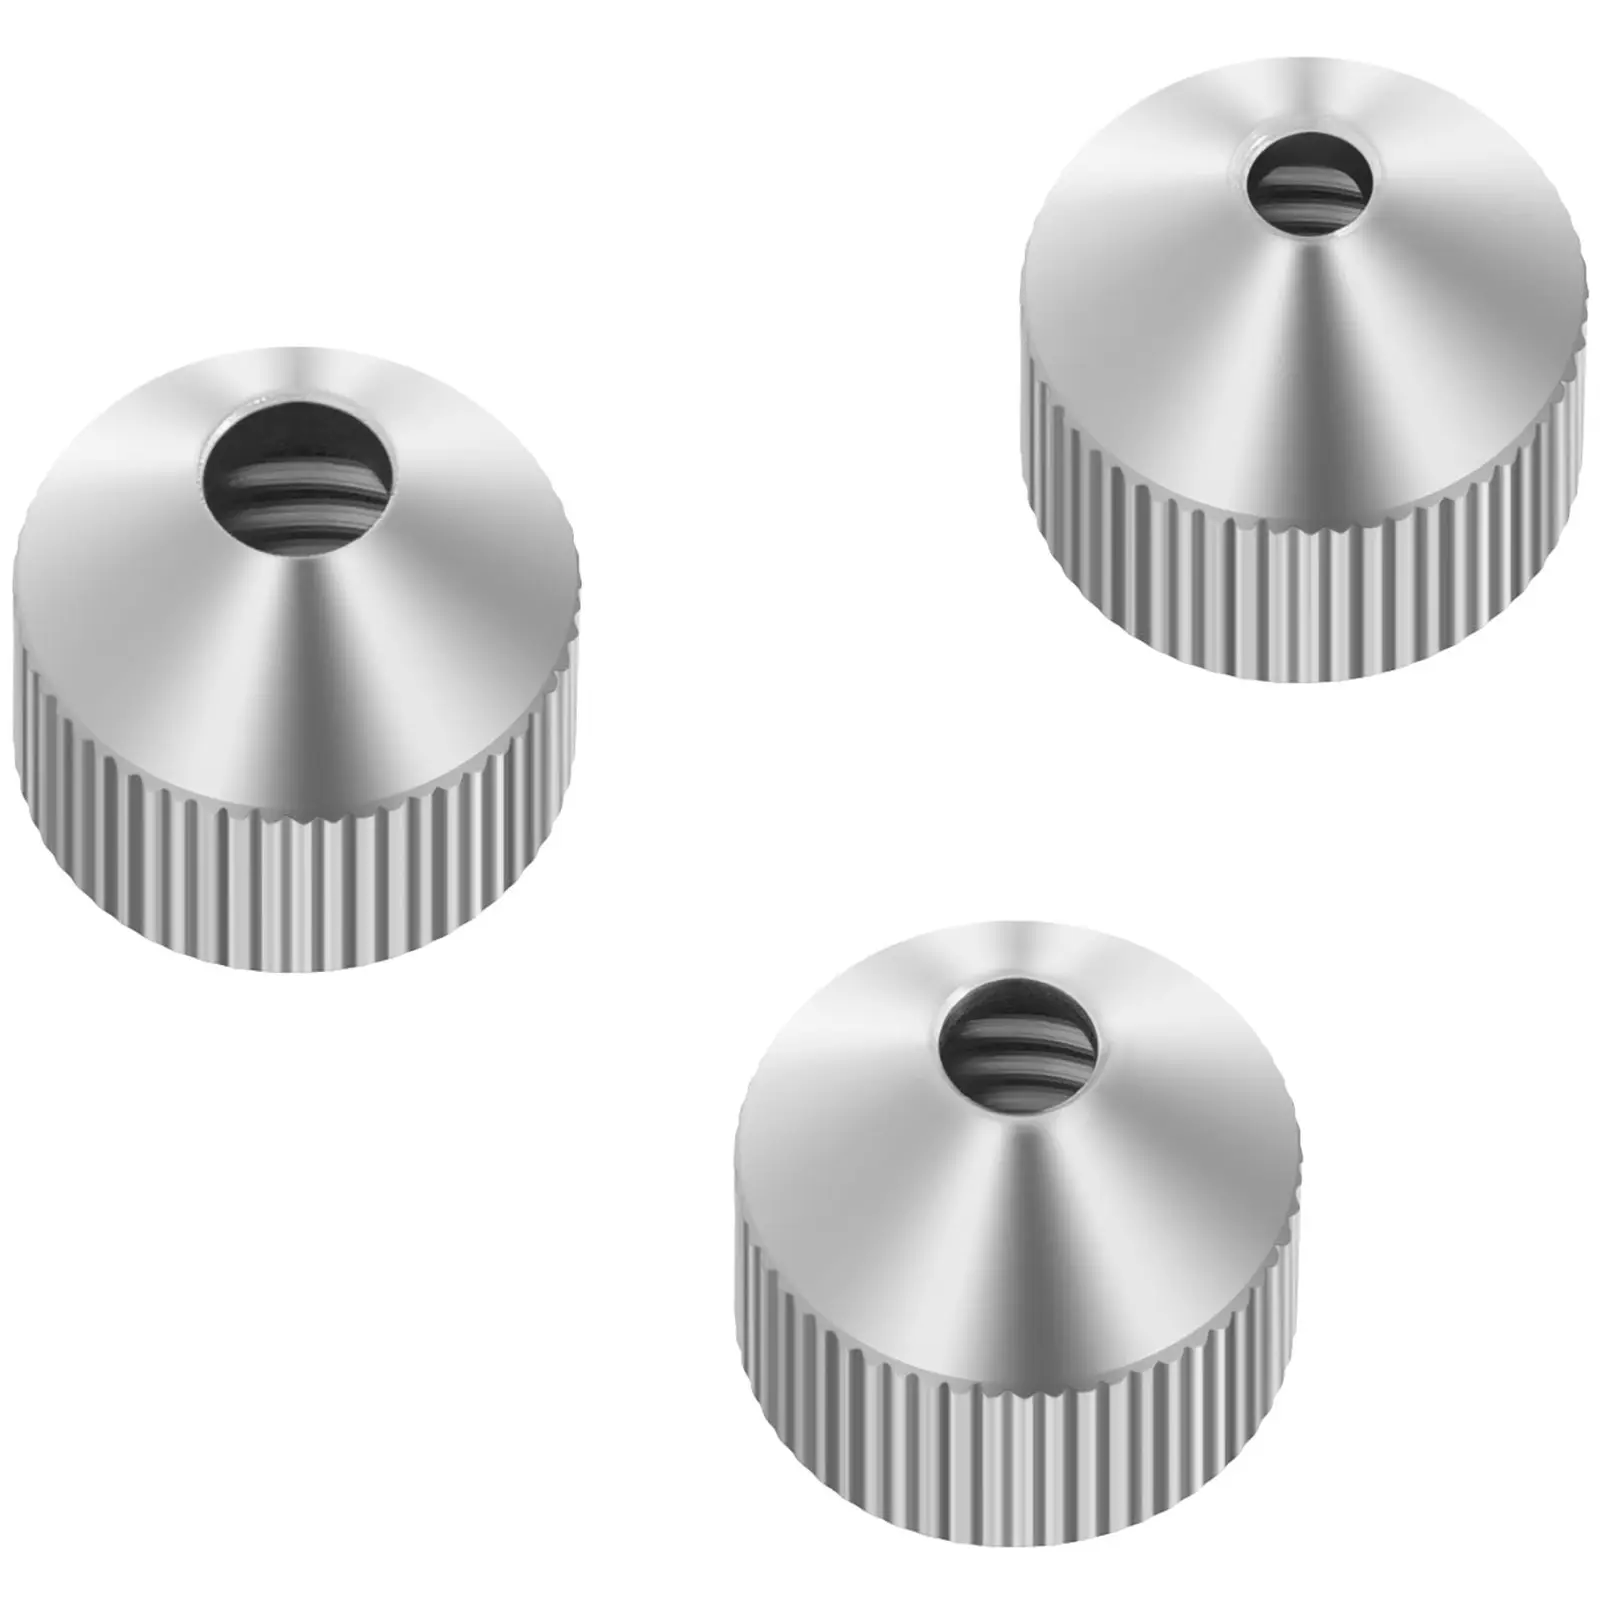 Piston Funnel - 2 Litres - With 3 Nozzles